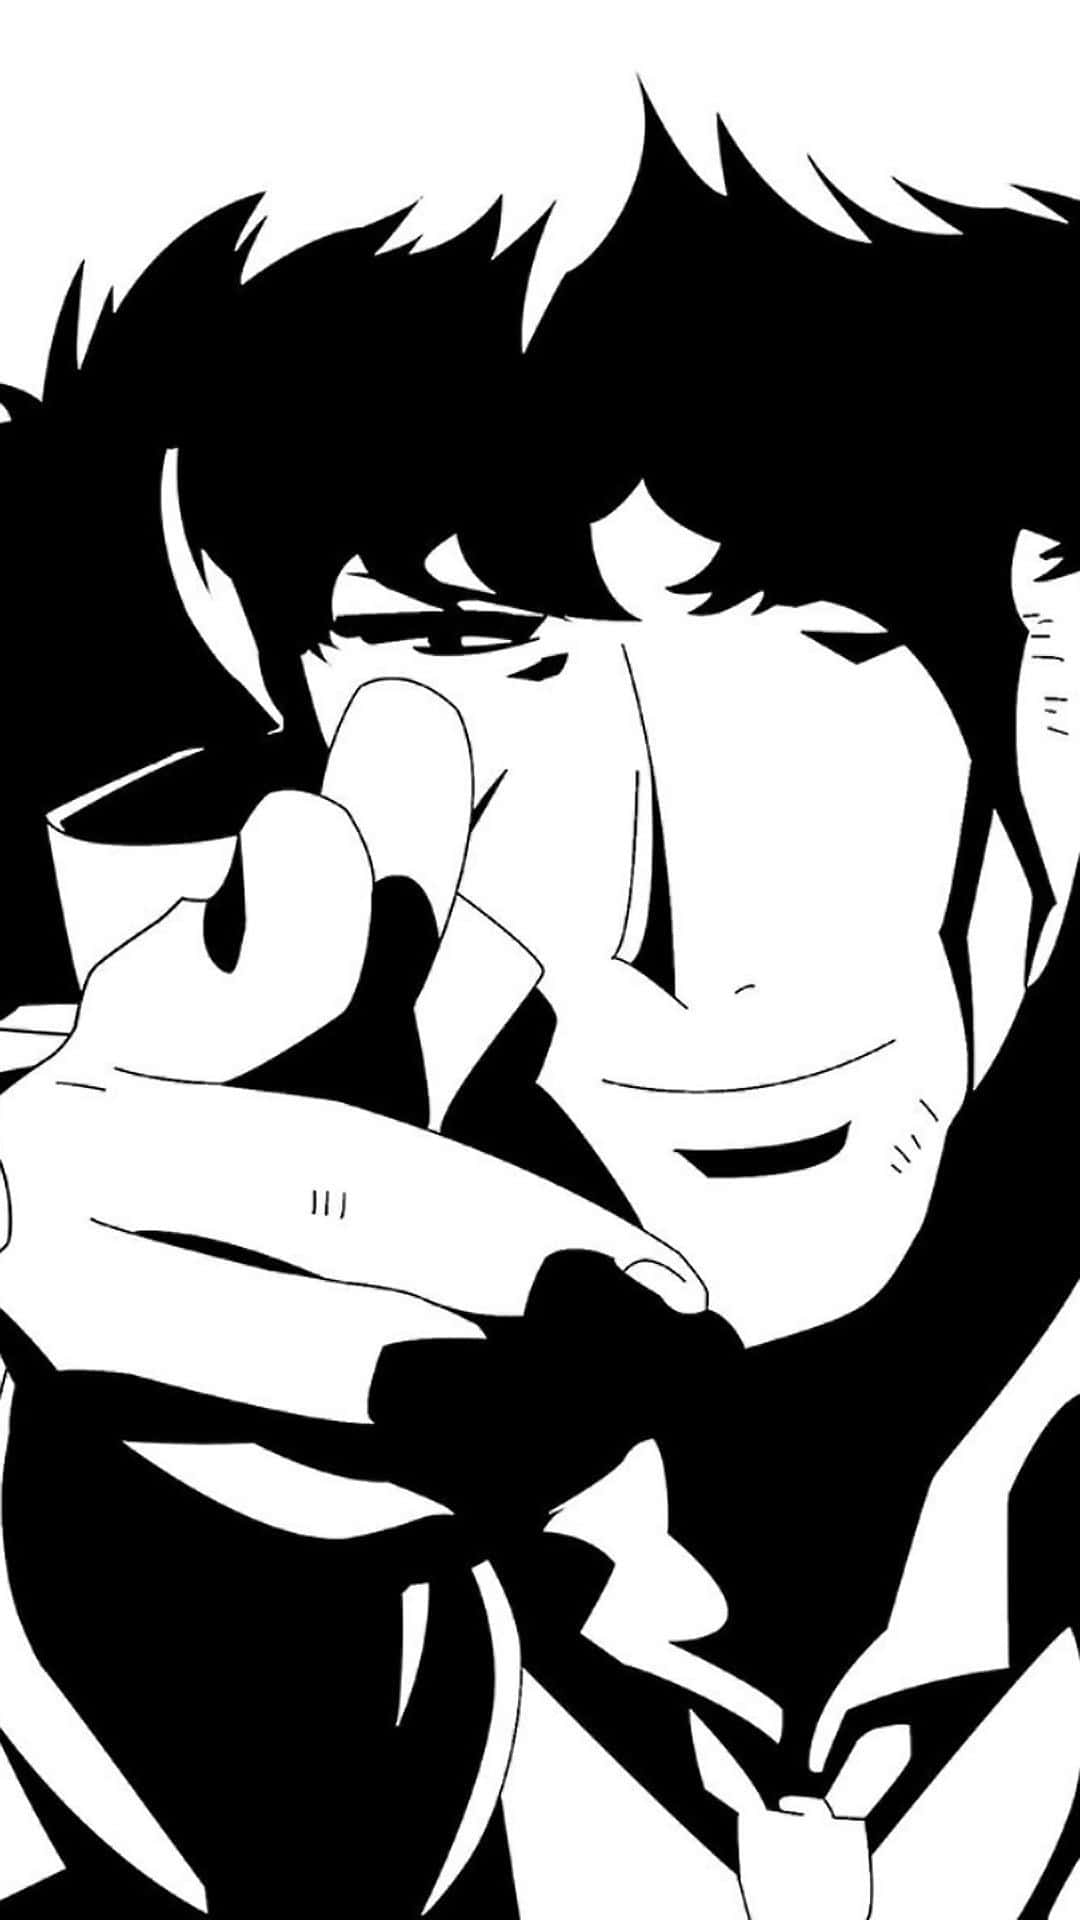 Join the Crew of "Cowboy Bebop" on Your iPhone Wallpaper